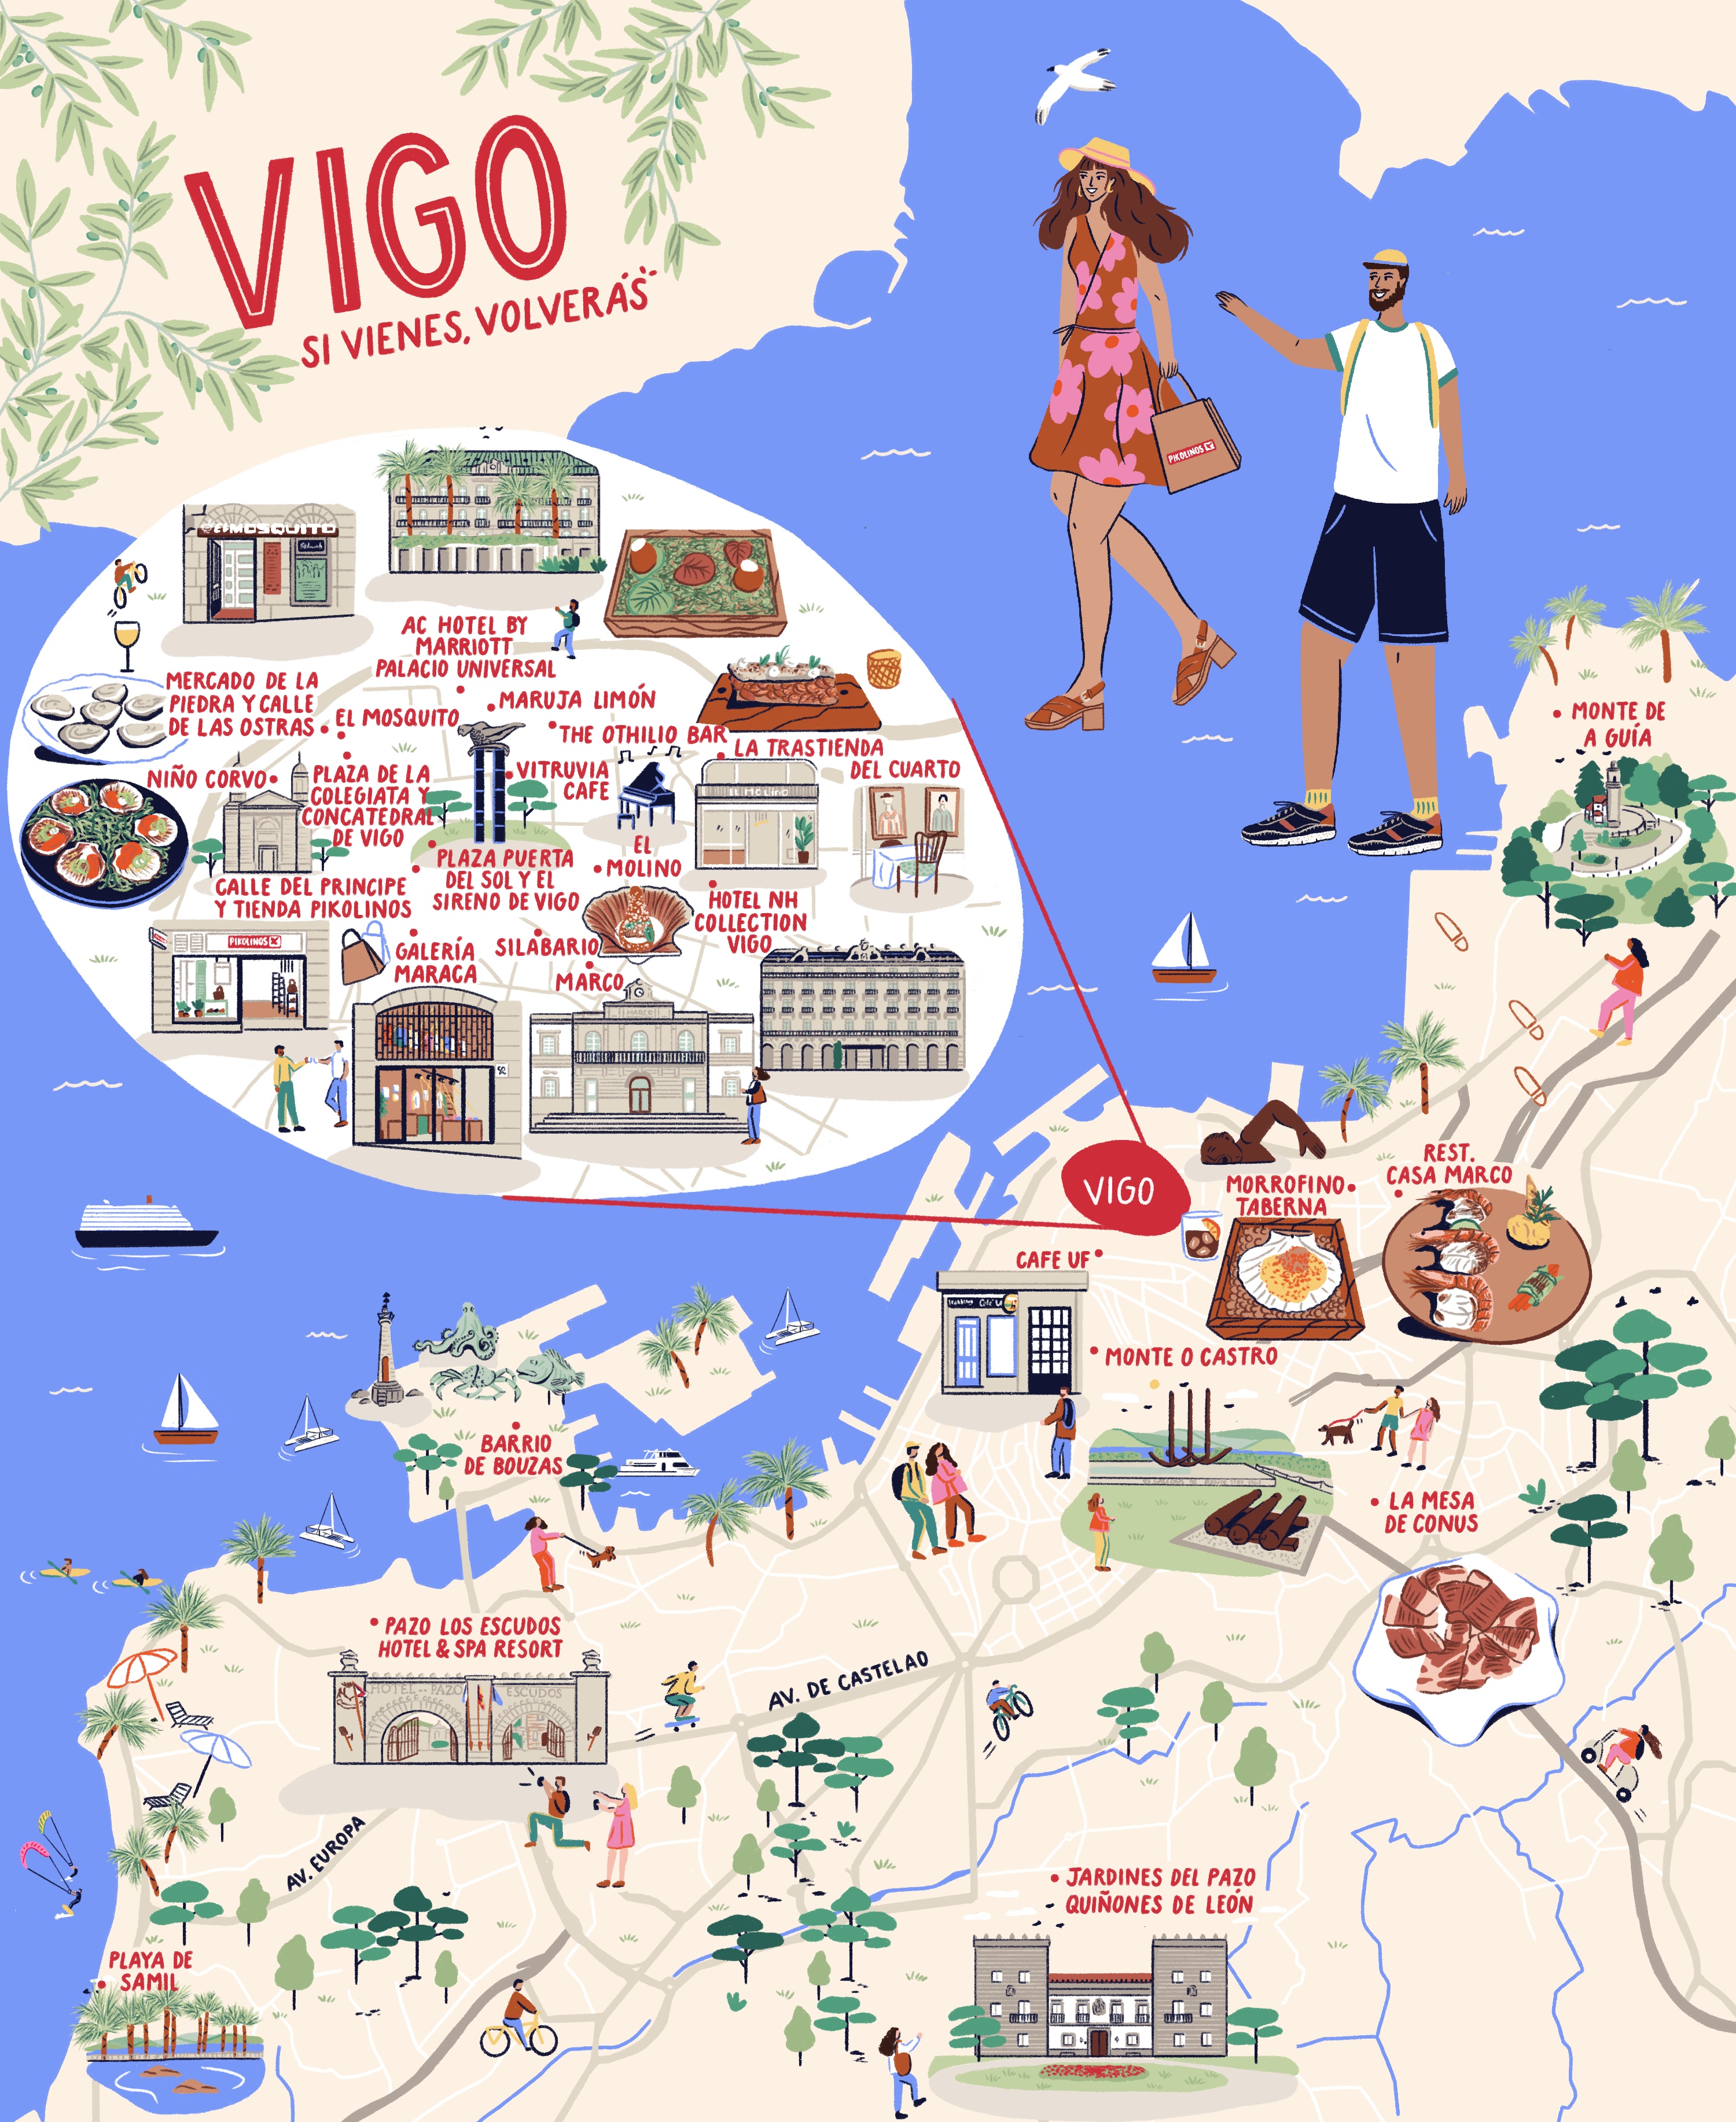 Illustrated map of the city of Vigo